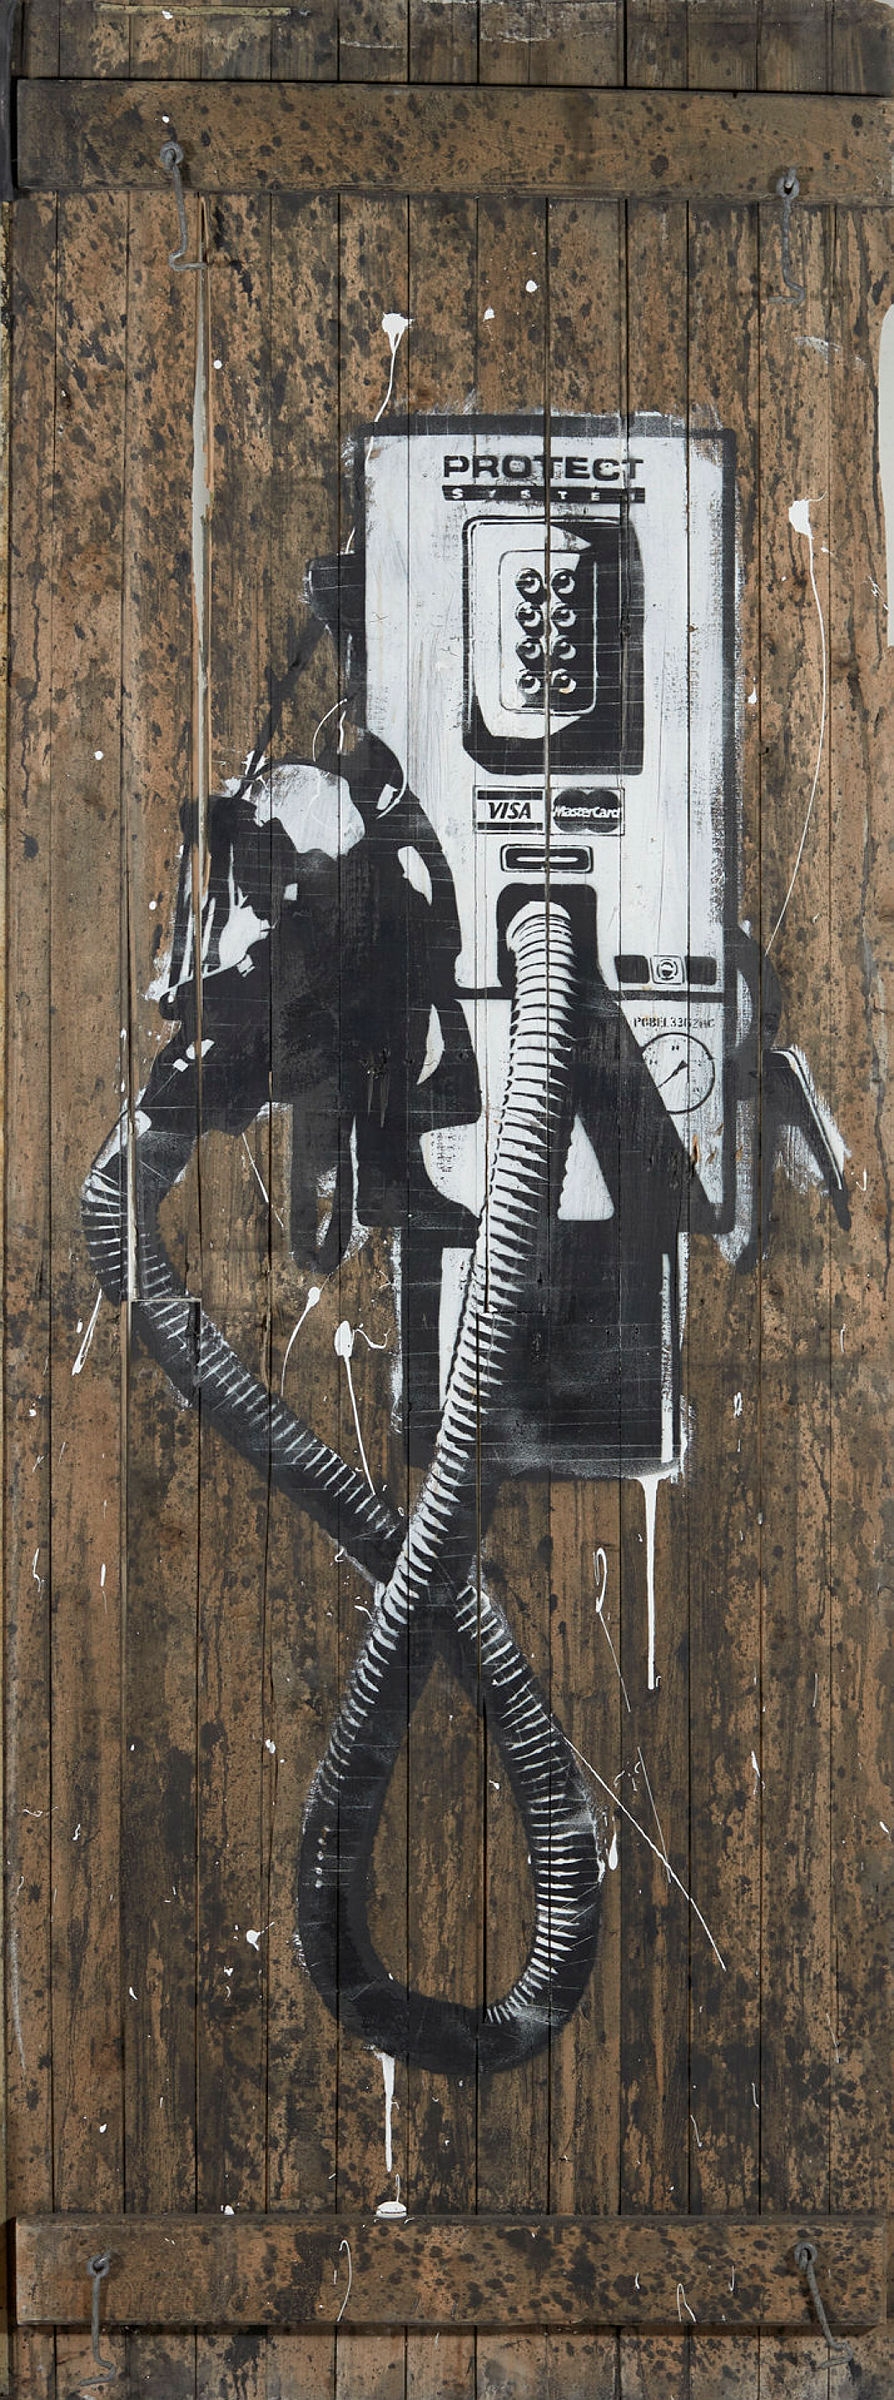 Artwork by Pøbel, Protect, Made of Stencil/spray paint on wood panels/ door